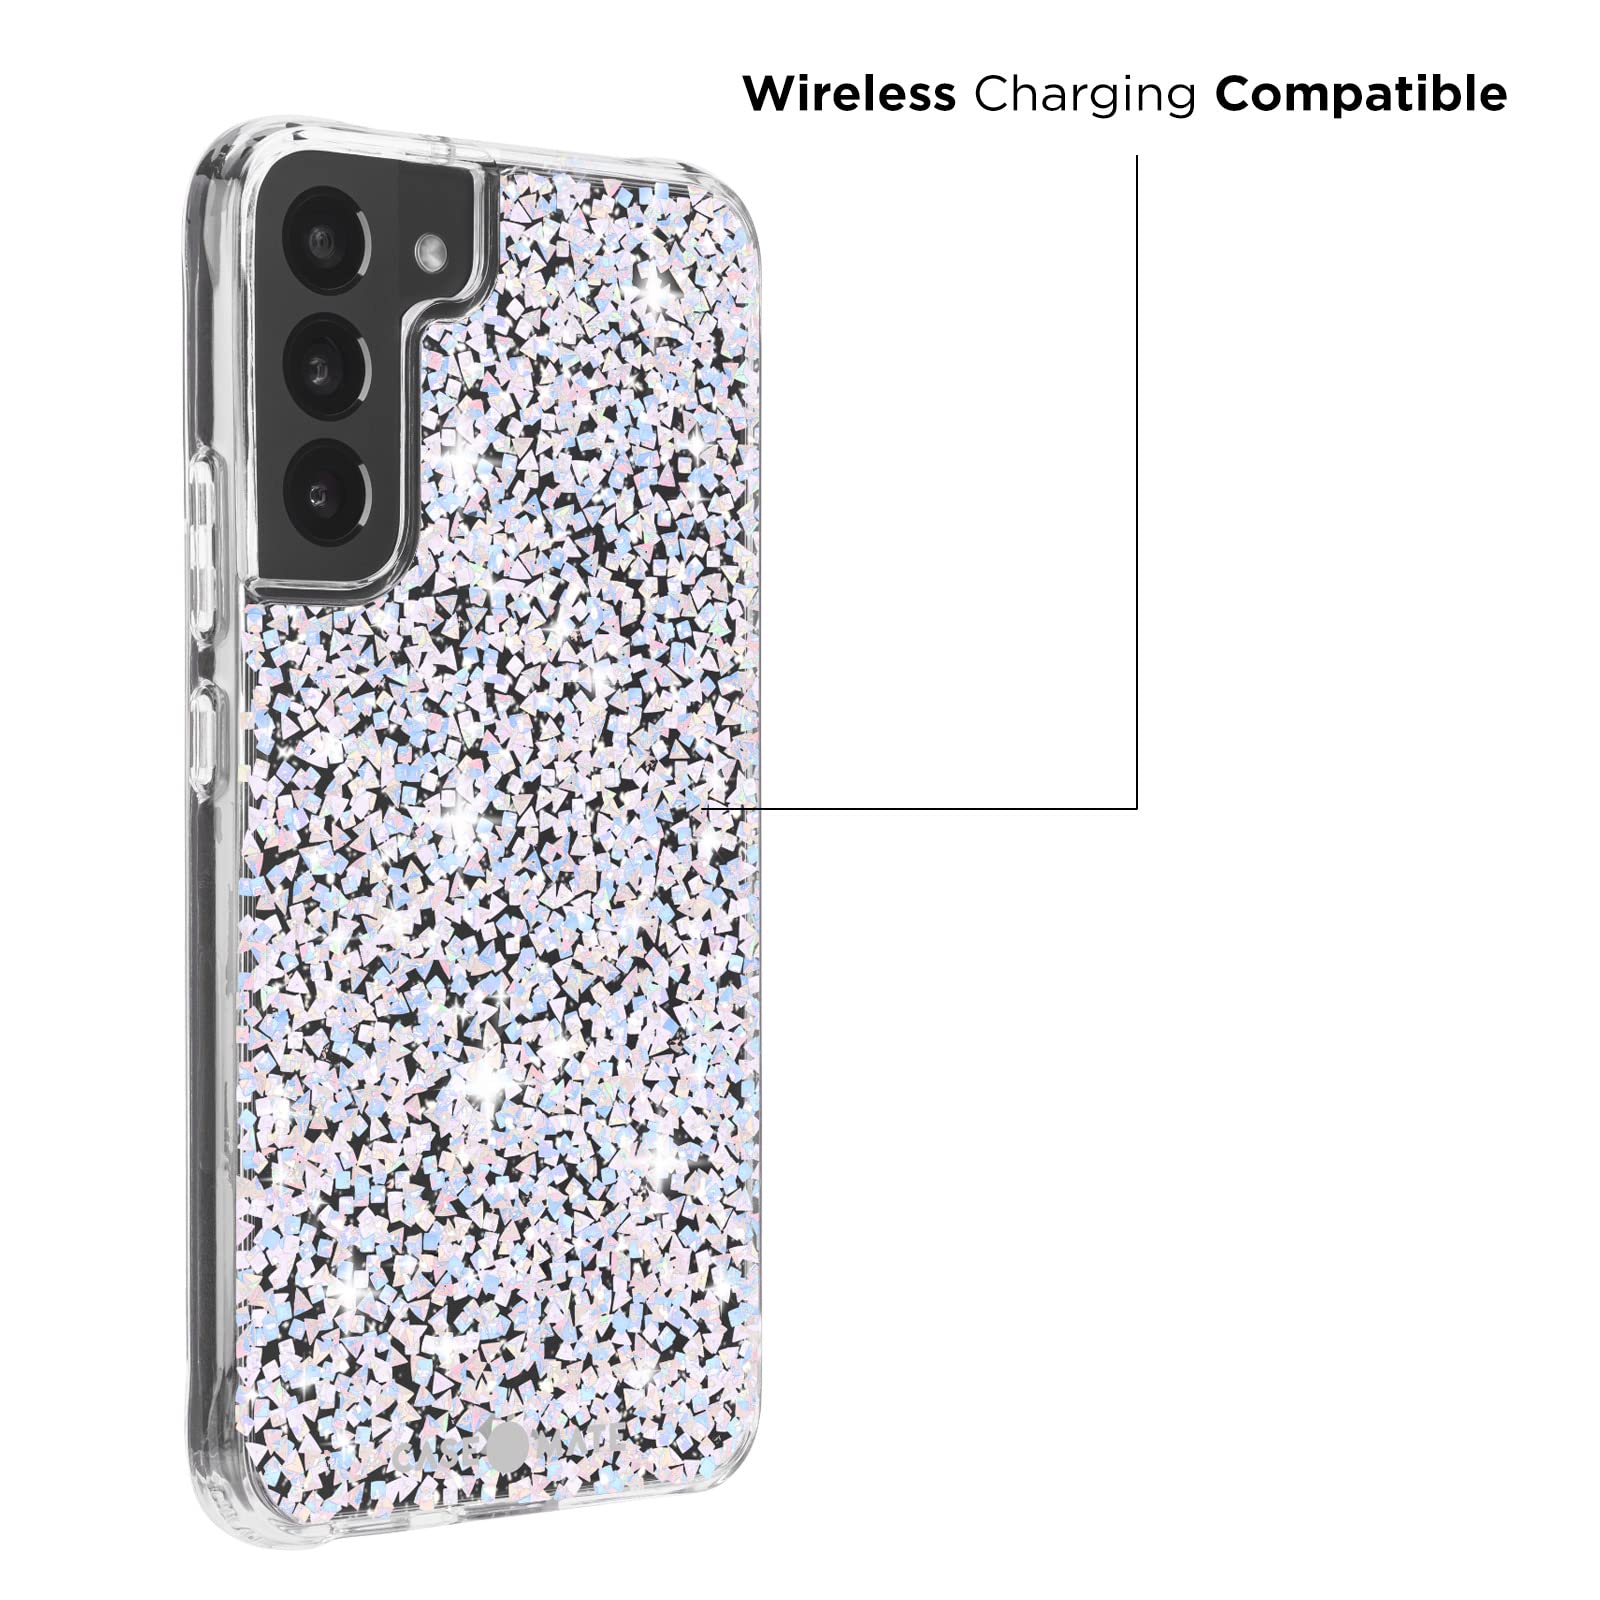 Case-Mate Samsung Galaxy S22 Plus Case - 6.6' Twinkle Diamond - 10ft Drop Protection with Wireless Charging - Luxury Bling Glitter for S22 Plus 5G - Anti Scratch, Shock Absorbing Materials, Slim Fit